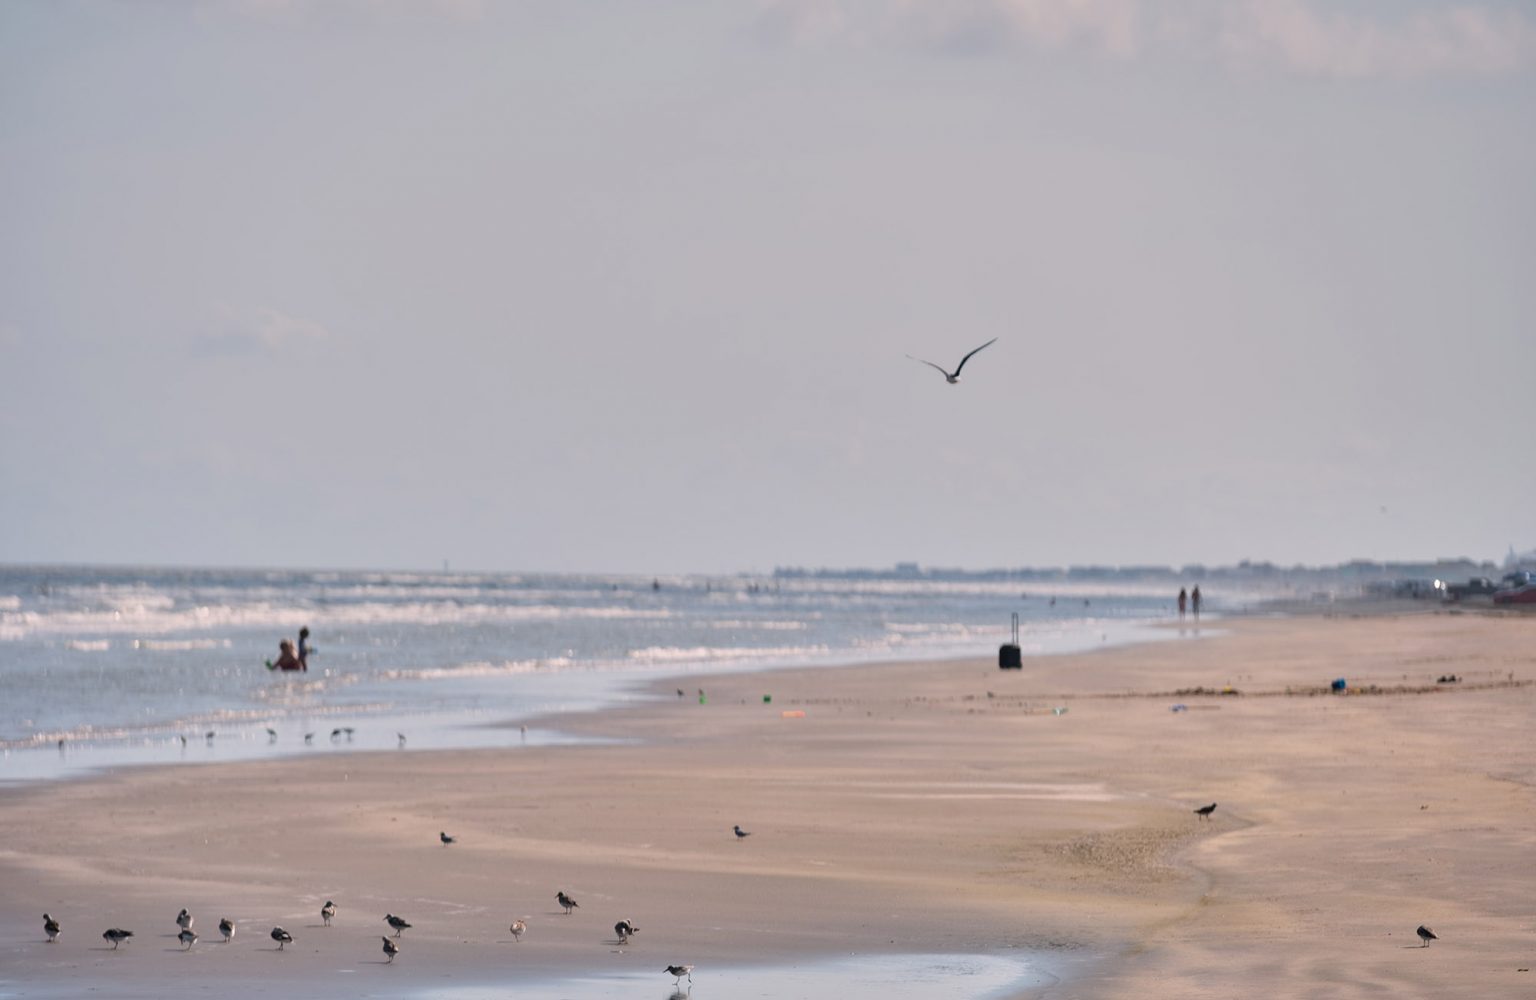 Birds gather along the cost of Follett's Island Beach in Brazoria County in Texas May 17, 2022. Each year, hurricane season brings devastating impacts to vulnerable communities along the upper Texas Gulf Coast.